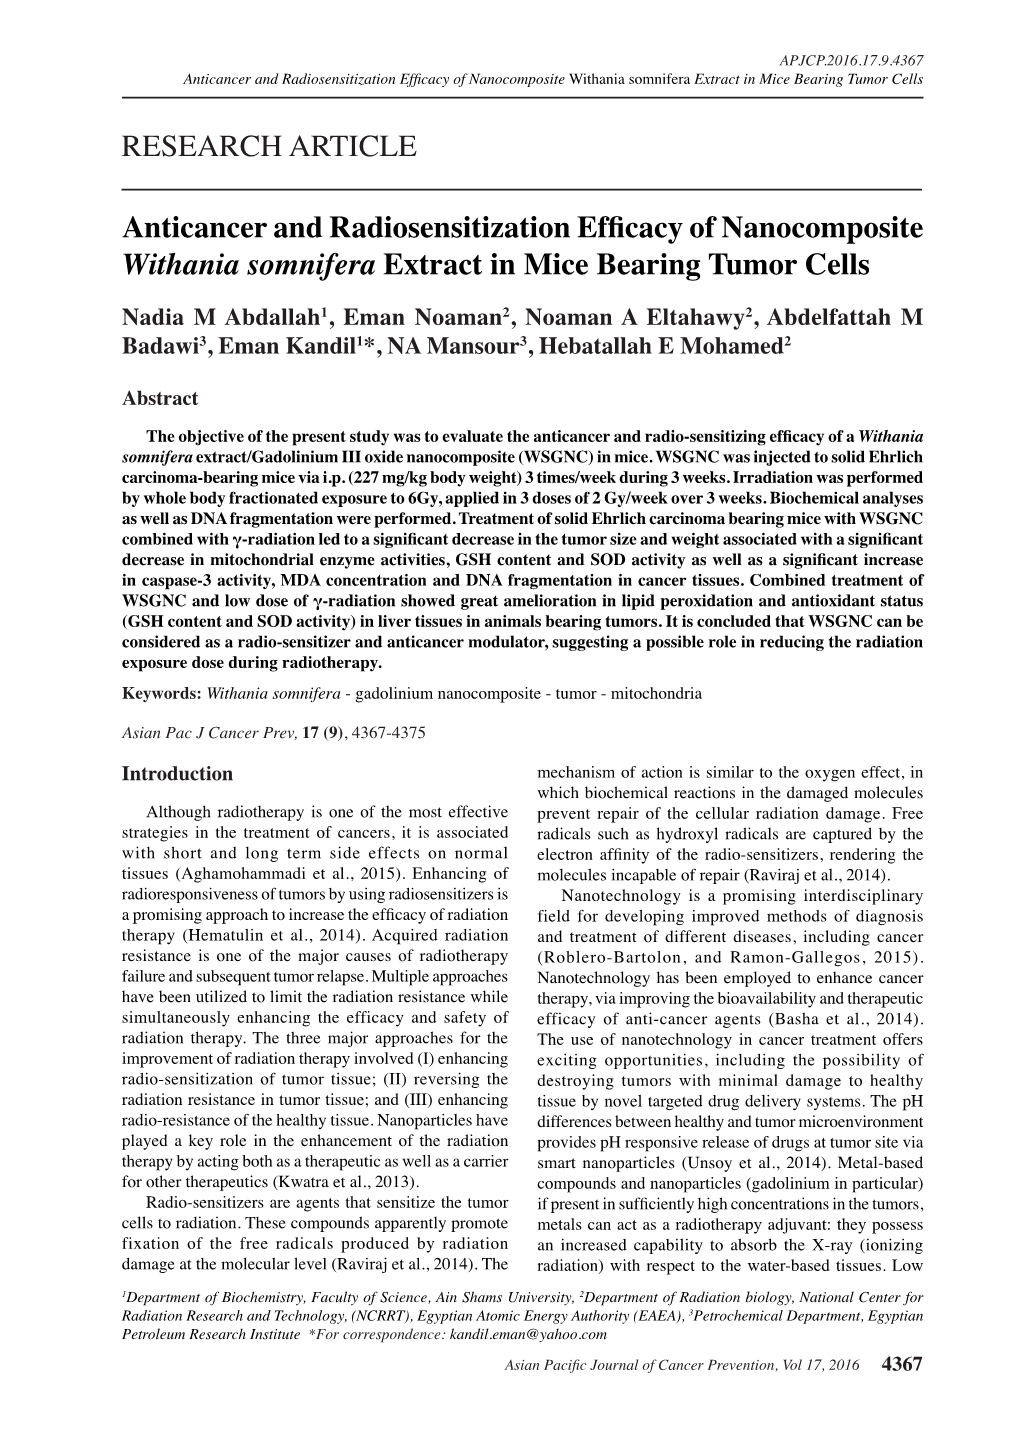 RESEARCH ARTICLE Anticancer and Radiosensitization Efficacy Of